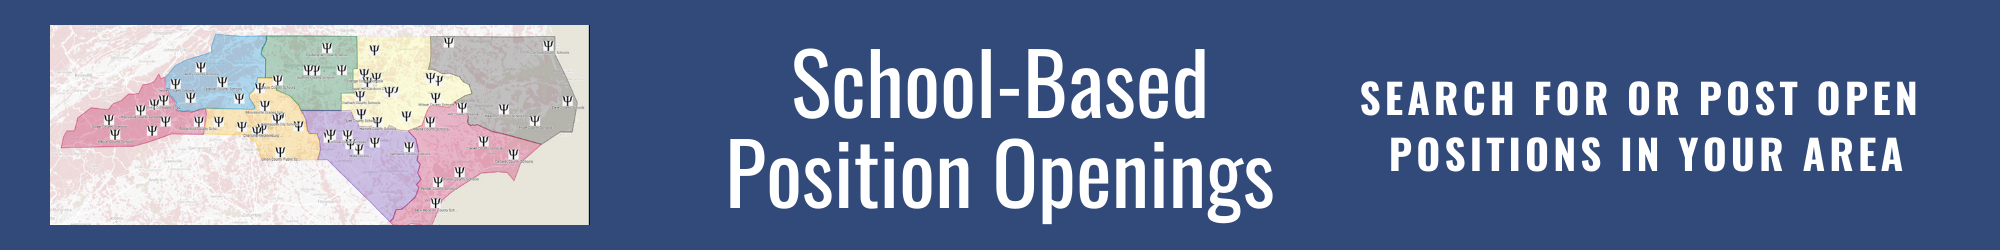 School-baased Position Openings. Search for jobs in your area! Post open positions in your district!